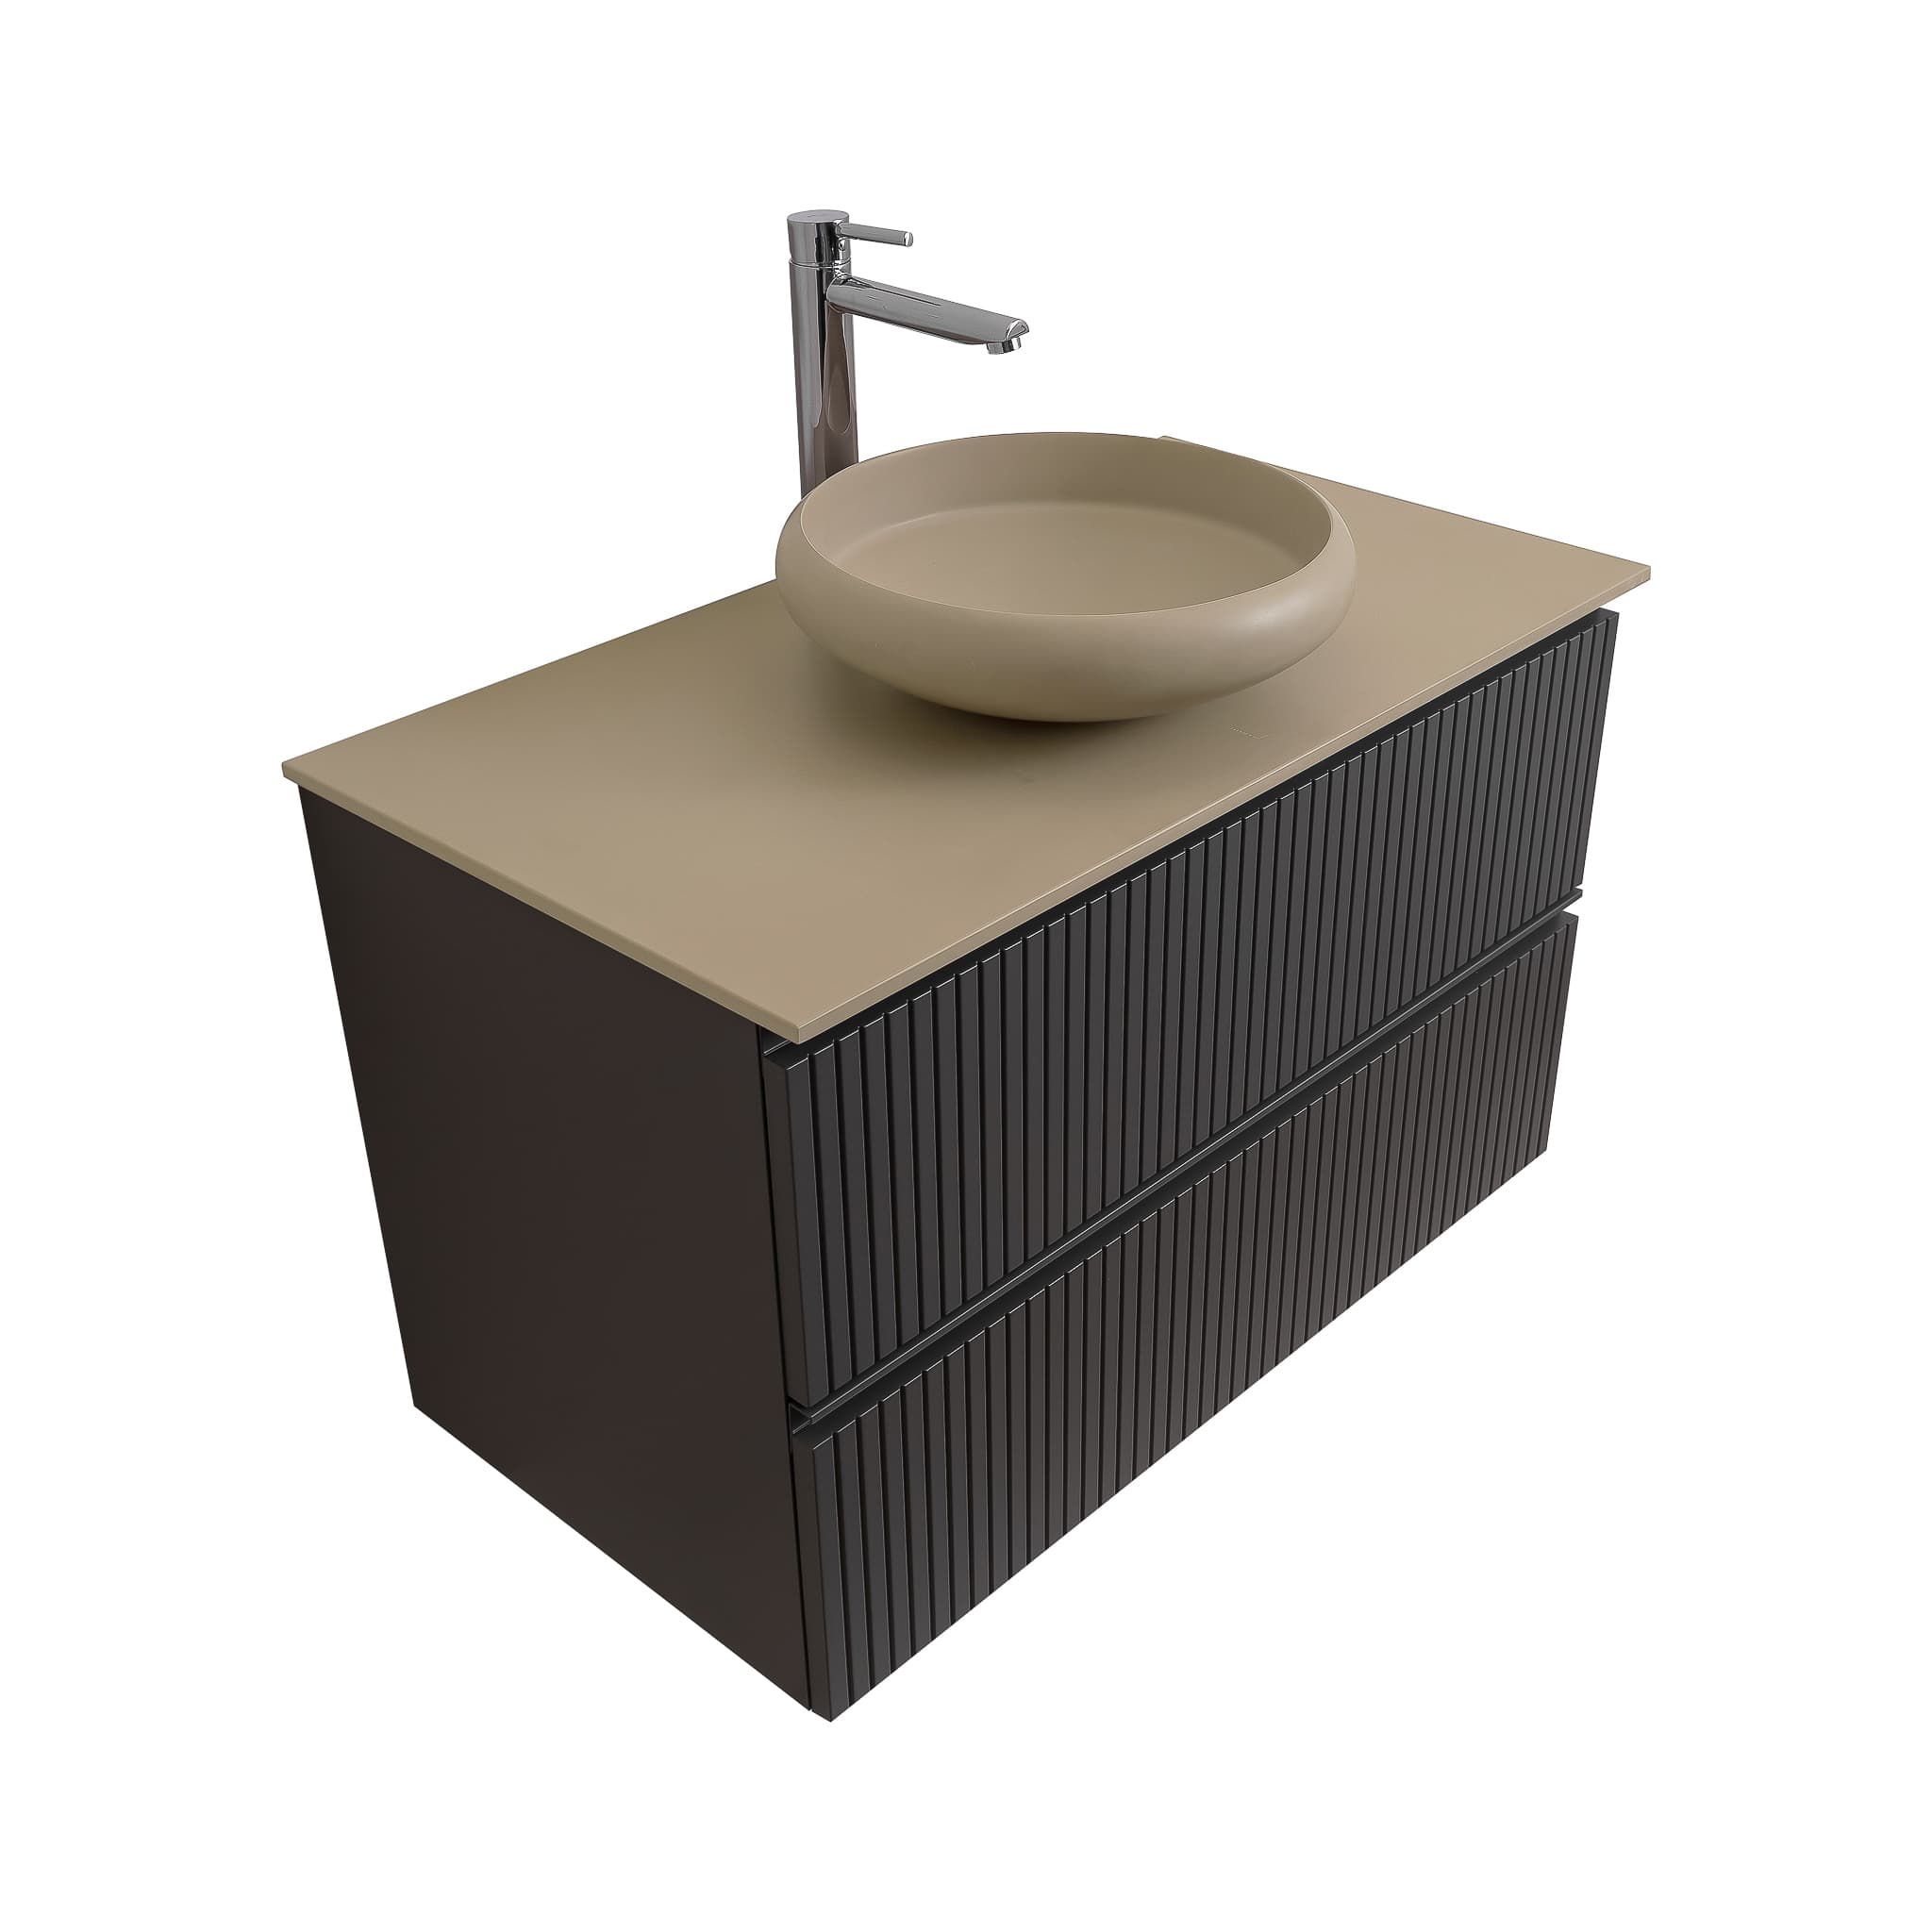 Ares 31.5 Matte Grey Cabinet, Solid Surface Flat Taupe Counter And Round Solid Surface Taupe Basin 1153, Wall Mounted Modern Vanity Set